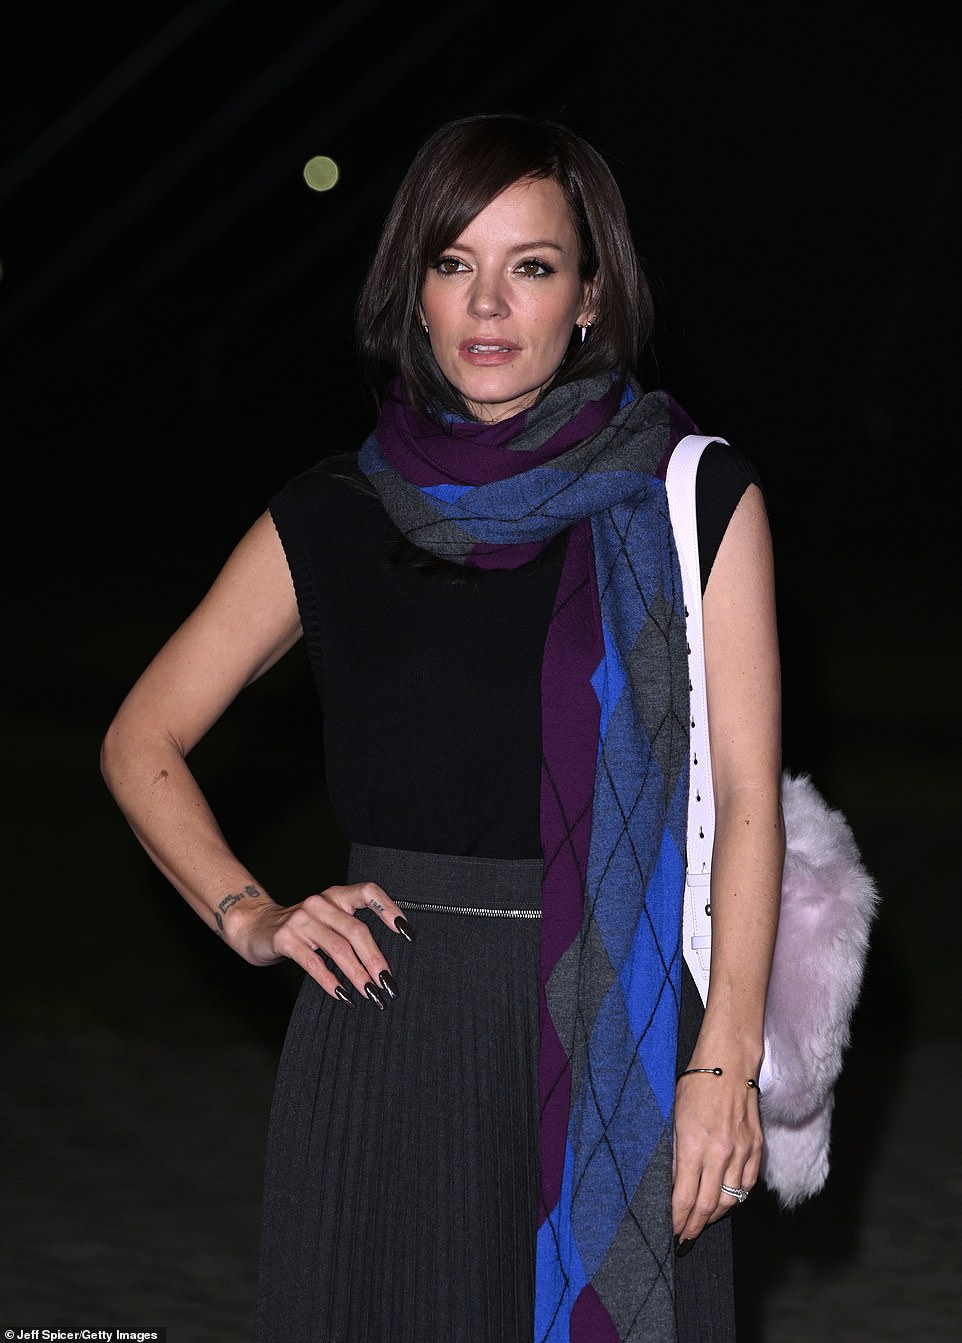 She wrapped a long argyle scarf around her neck that featured the color blue and purple, which matched her heels.